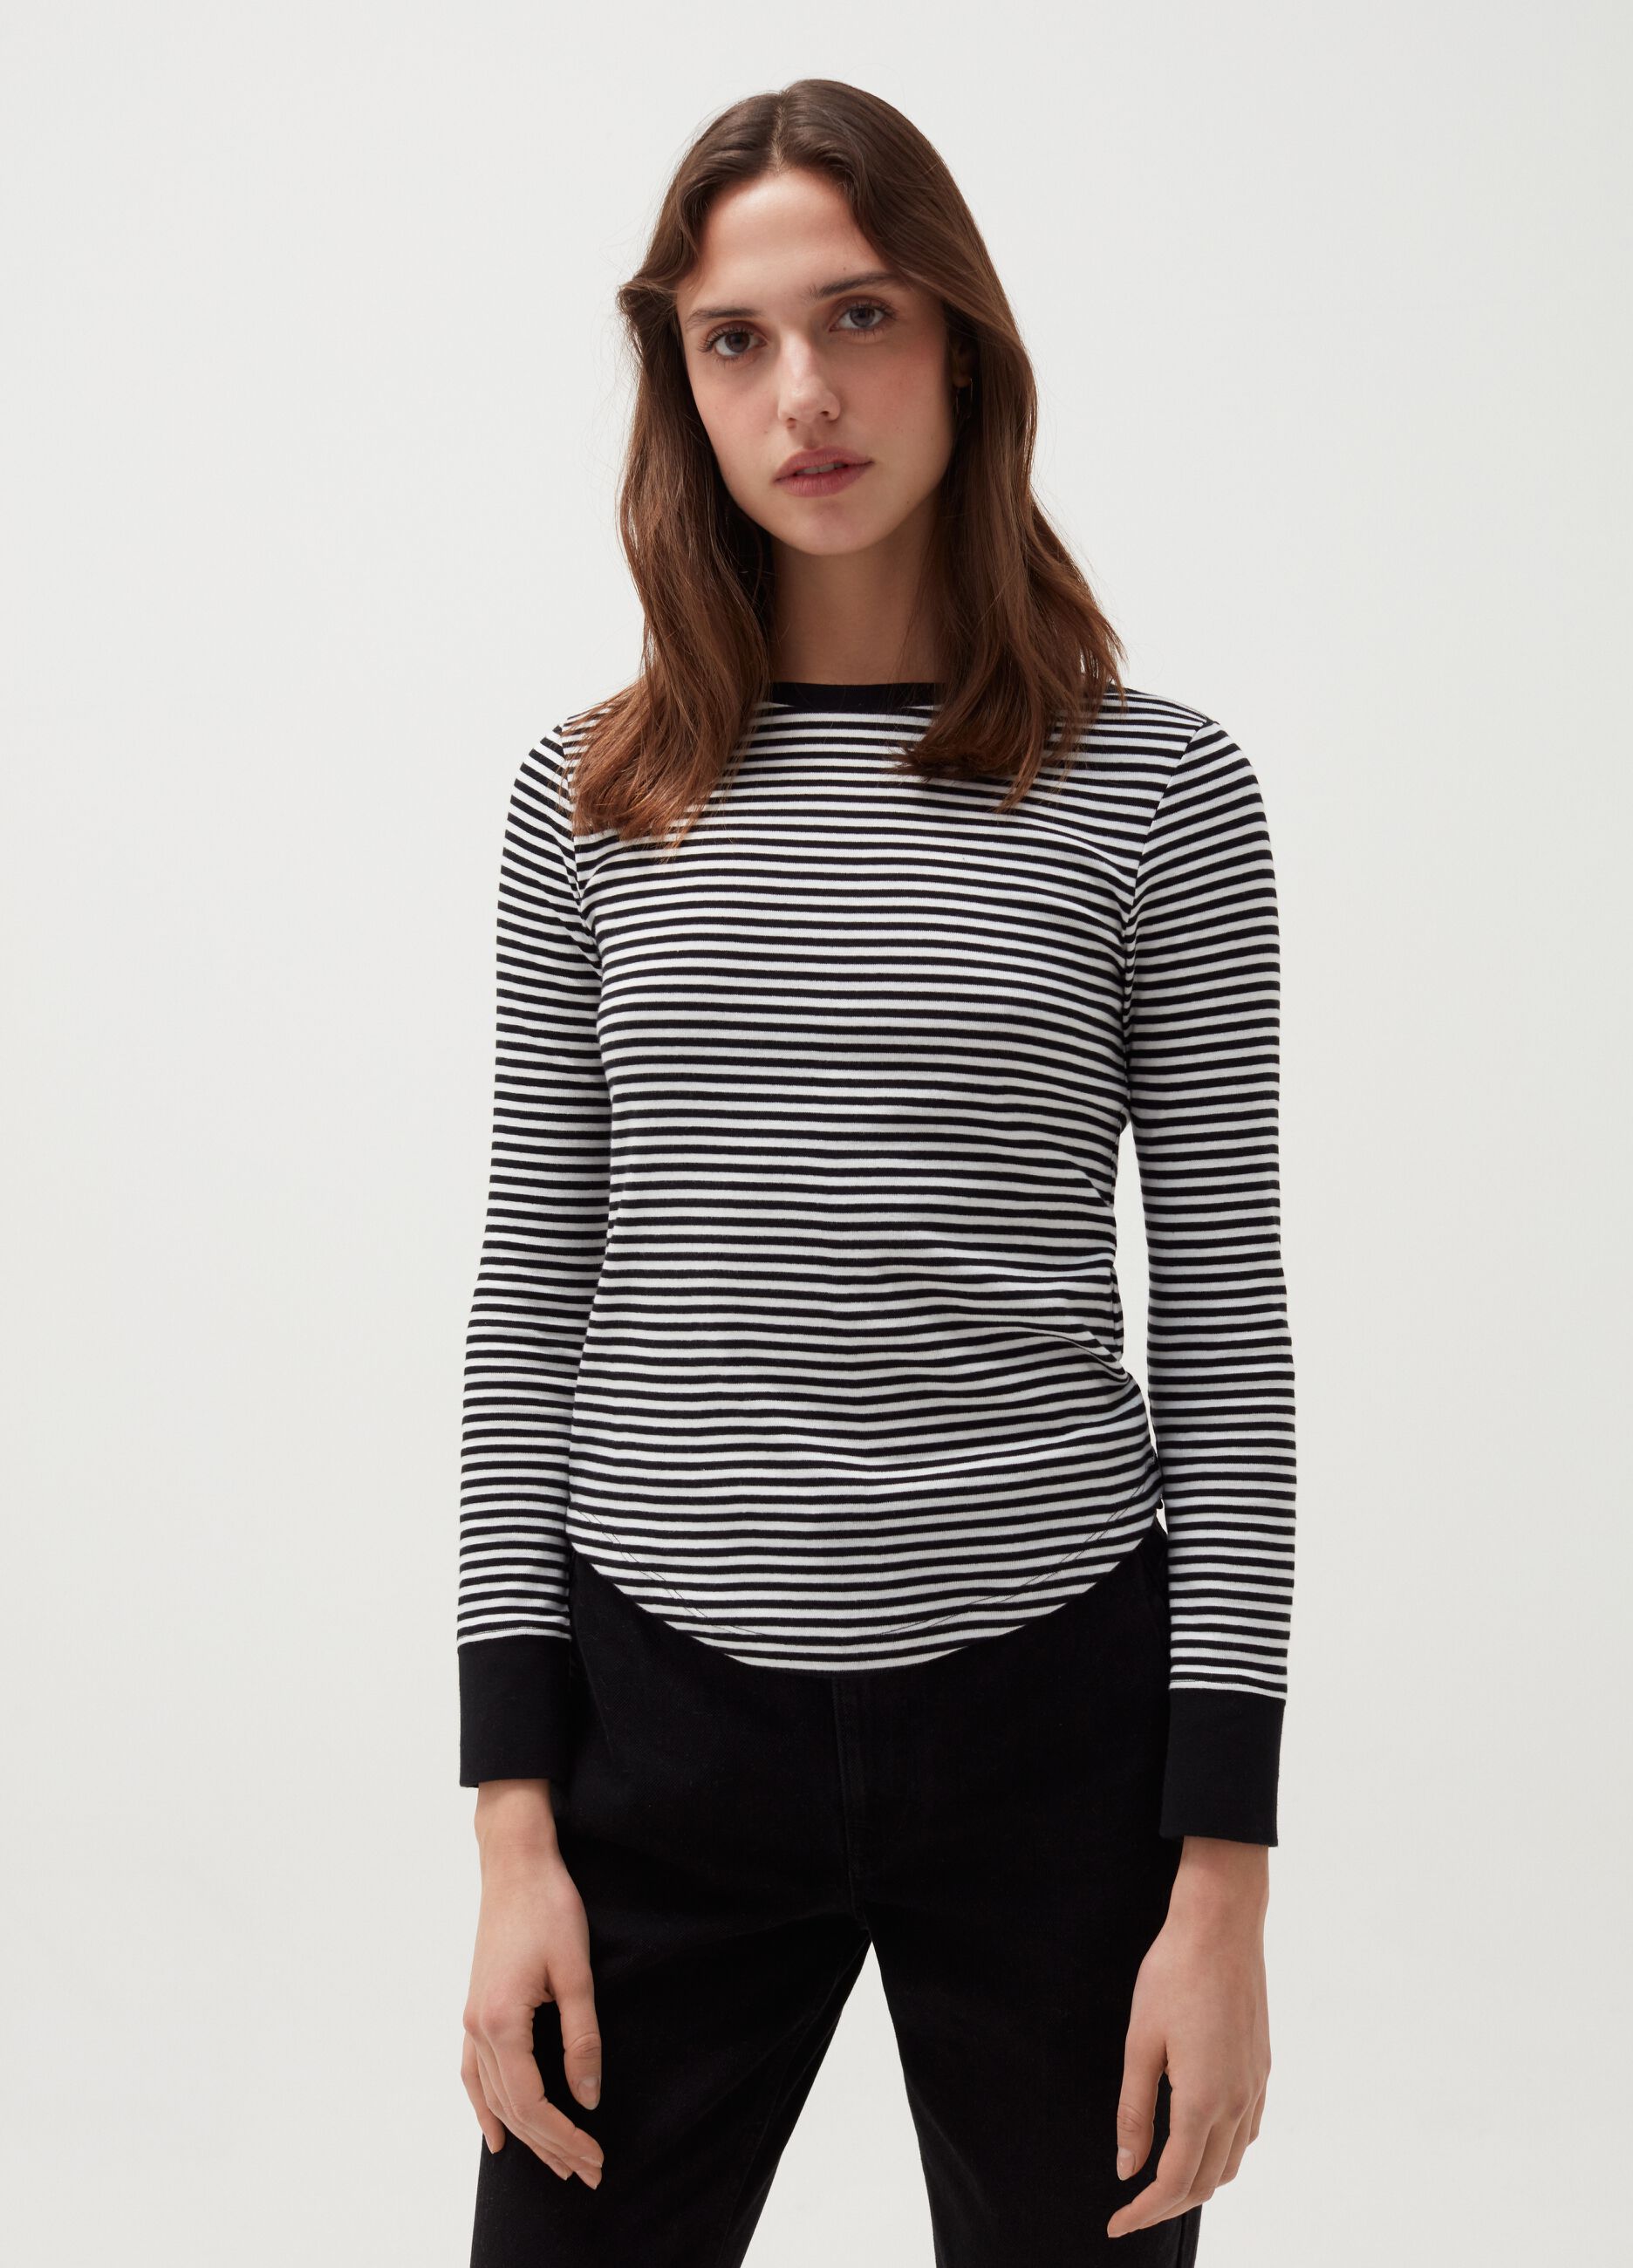 Striped T-shirt with boat neck